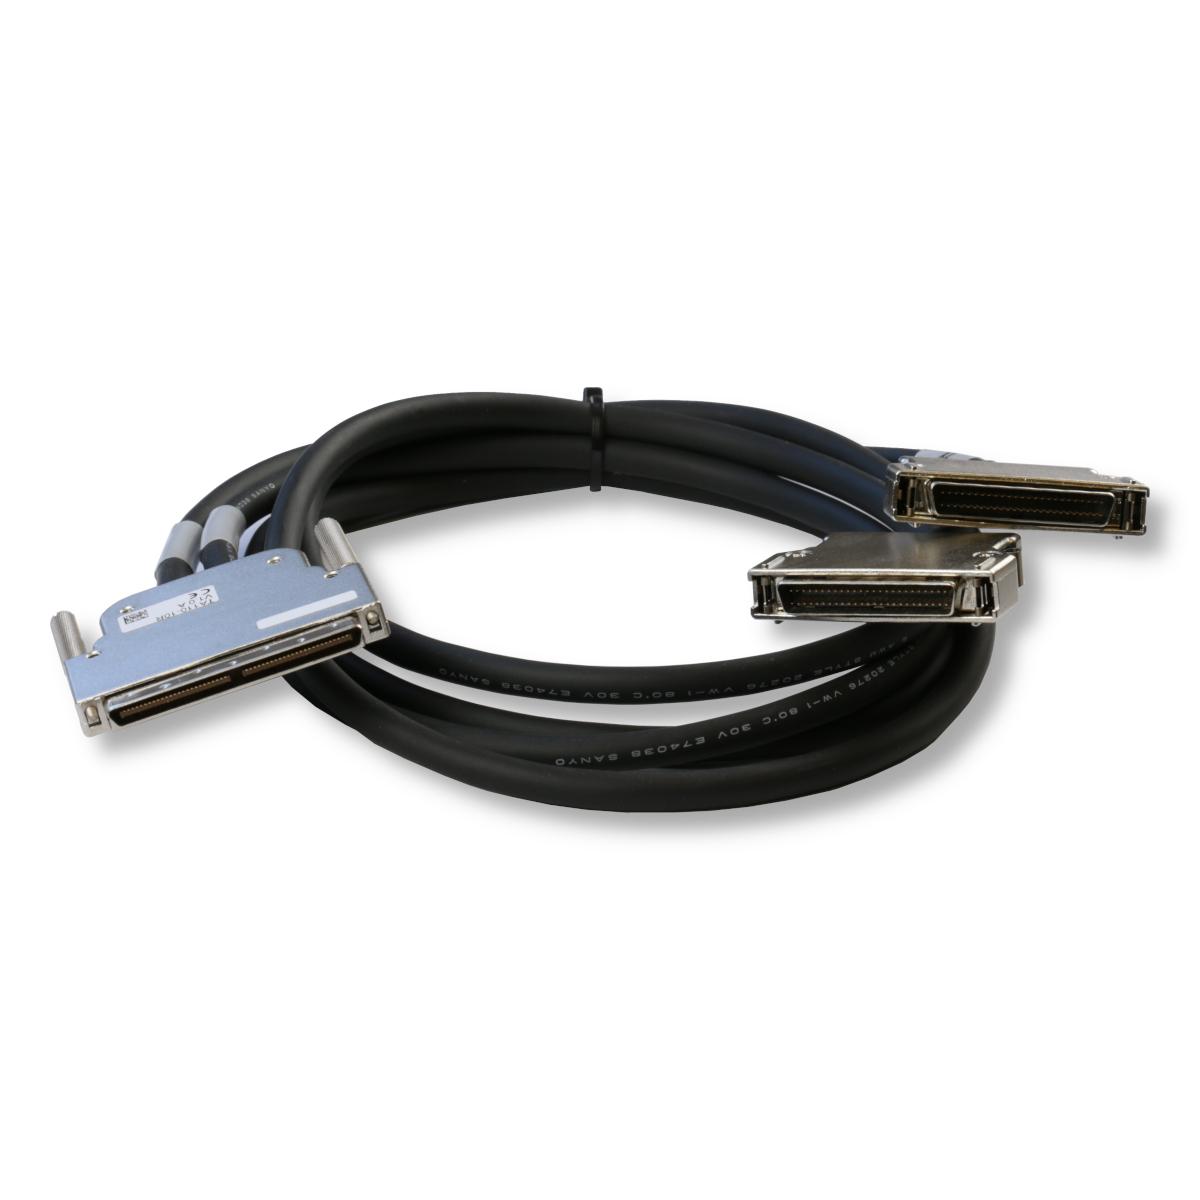 Product TA110 | VHDCI-100 Cable, 1.2 m | TEWS Technologies GmbH image